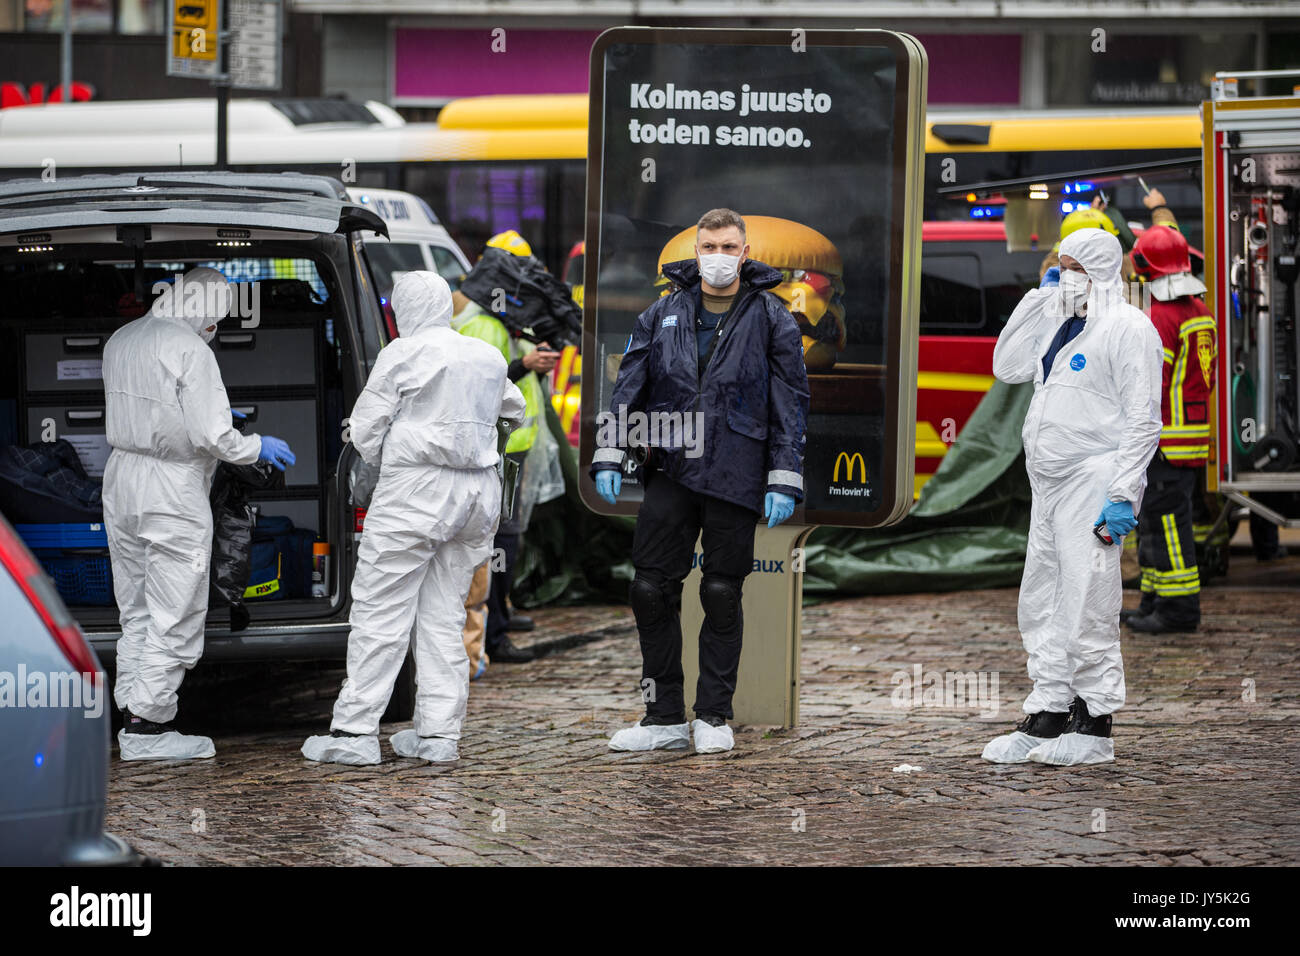 Turku, Finland. 18th of August 2017. Investigators at the scene of knife attack in Turku market square. Two people have been killed and six others wounded in a knife attack at Turku market square and Puutori. The police was able to stop the attacker within minutes after the first emergency call by shooting him at thigh. Credit: Jarmo Piironen/Alamy Live News Stock Photo